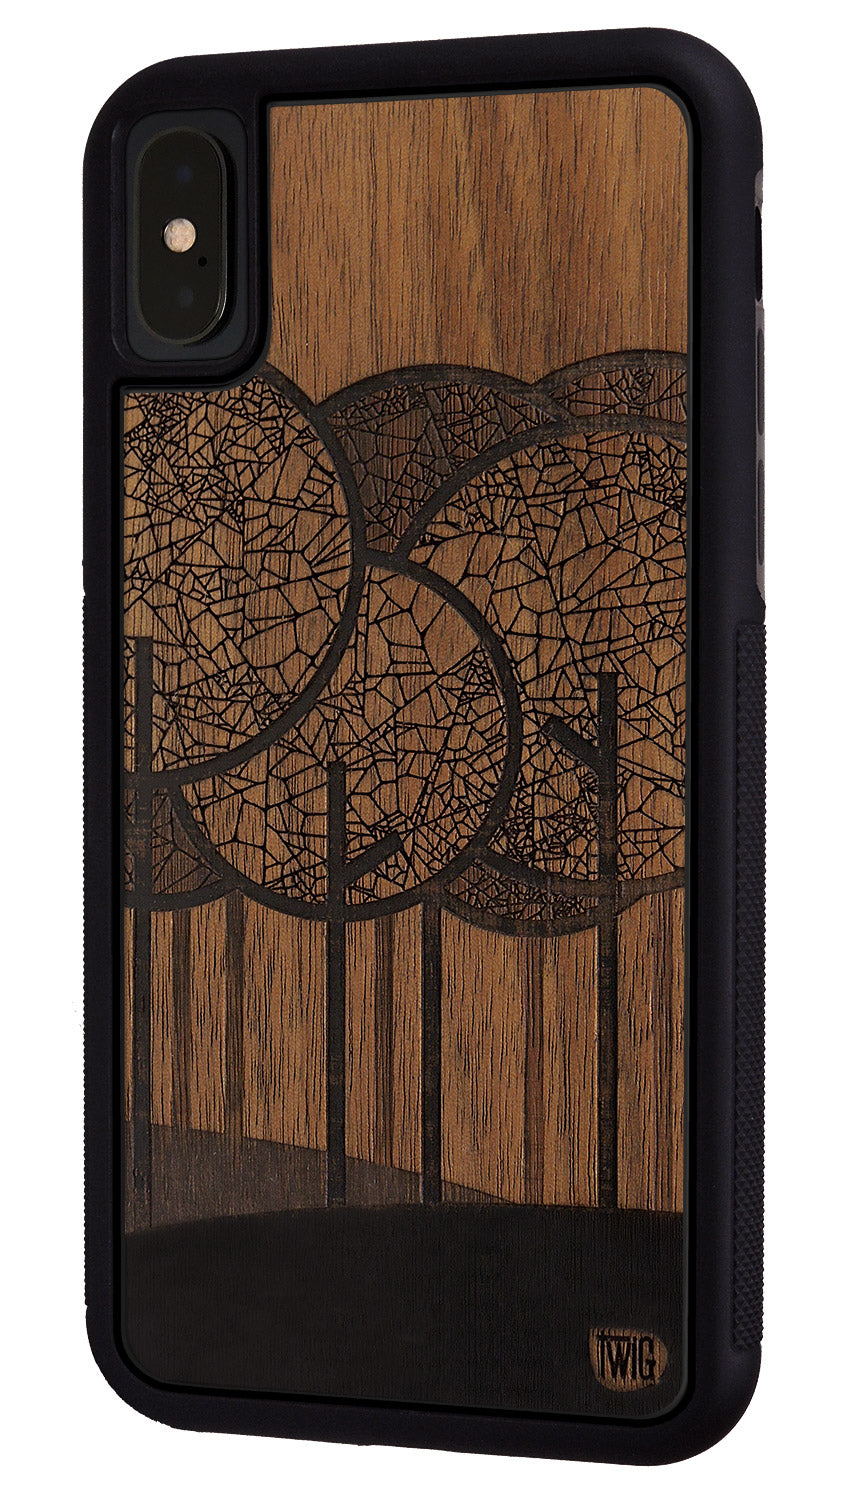 The Silent Grove - Walnut iPhone Case, iPhone Case - Twig Case Co.